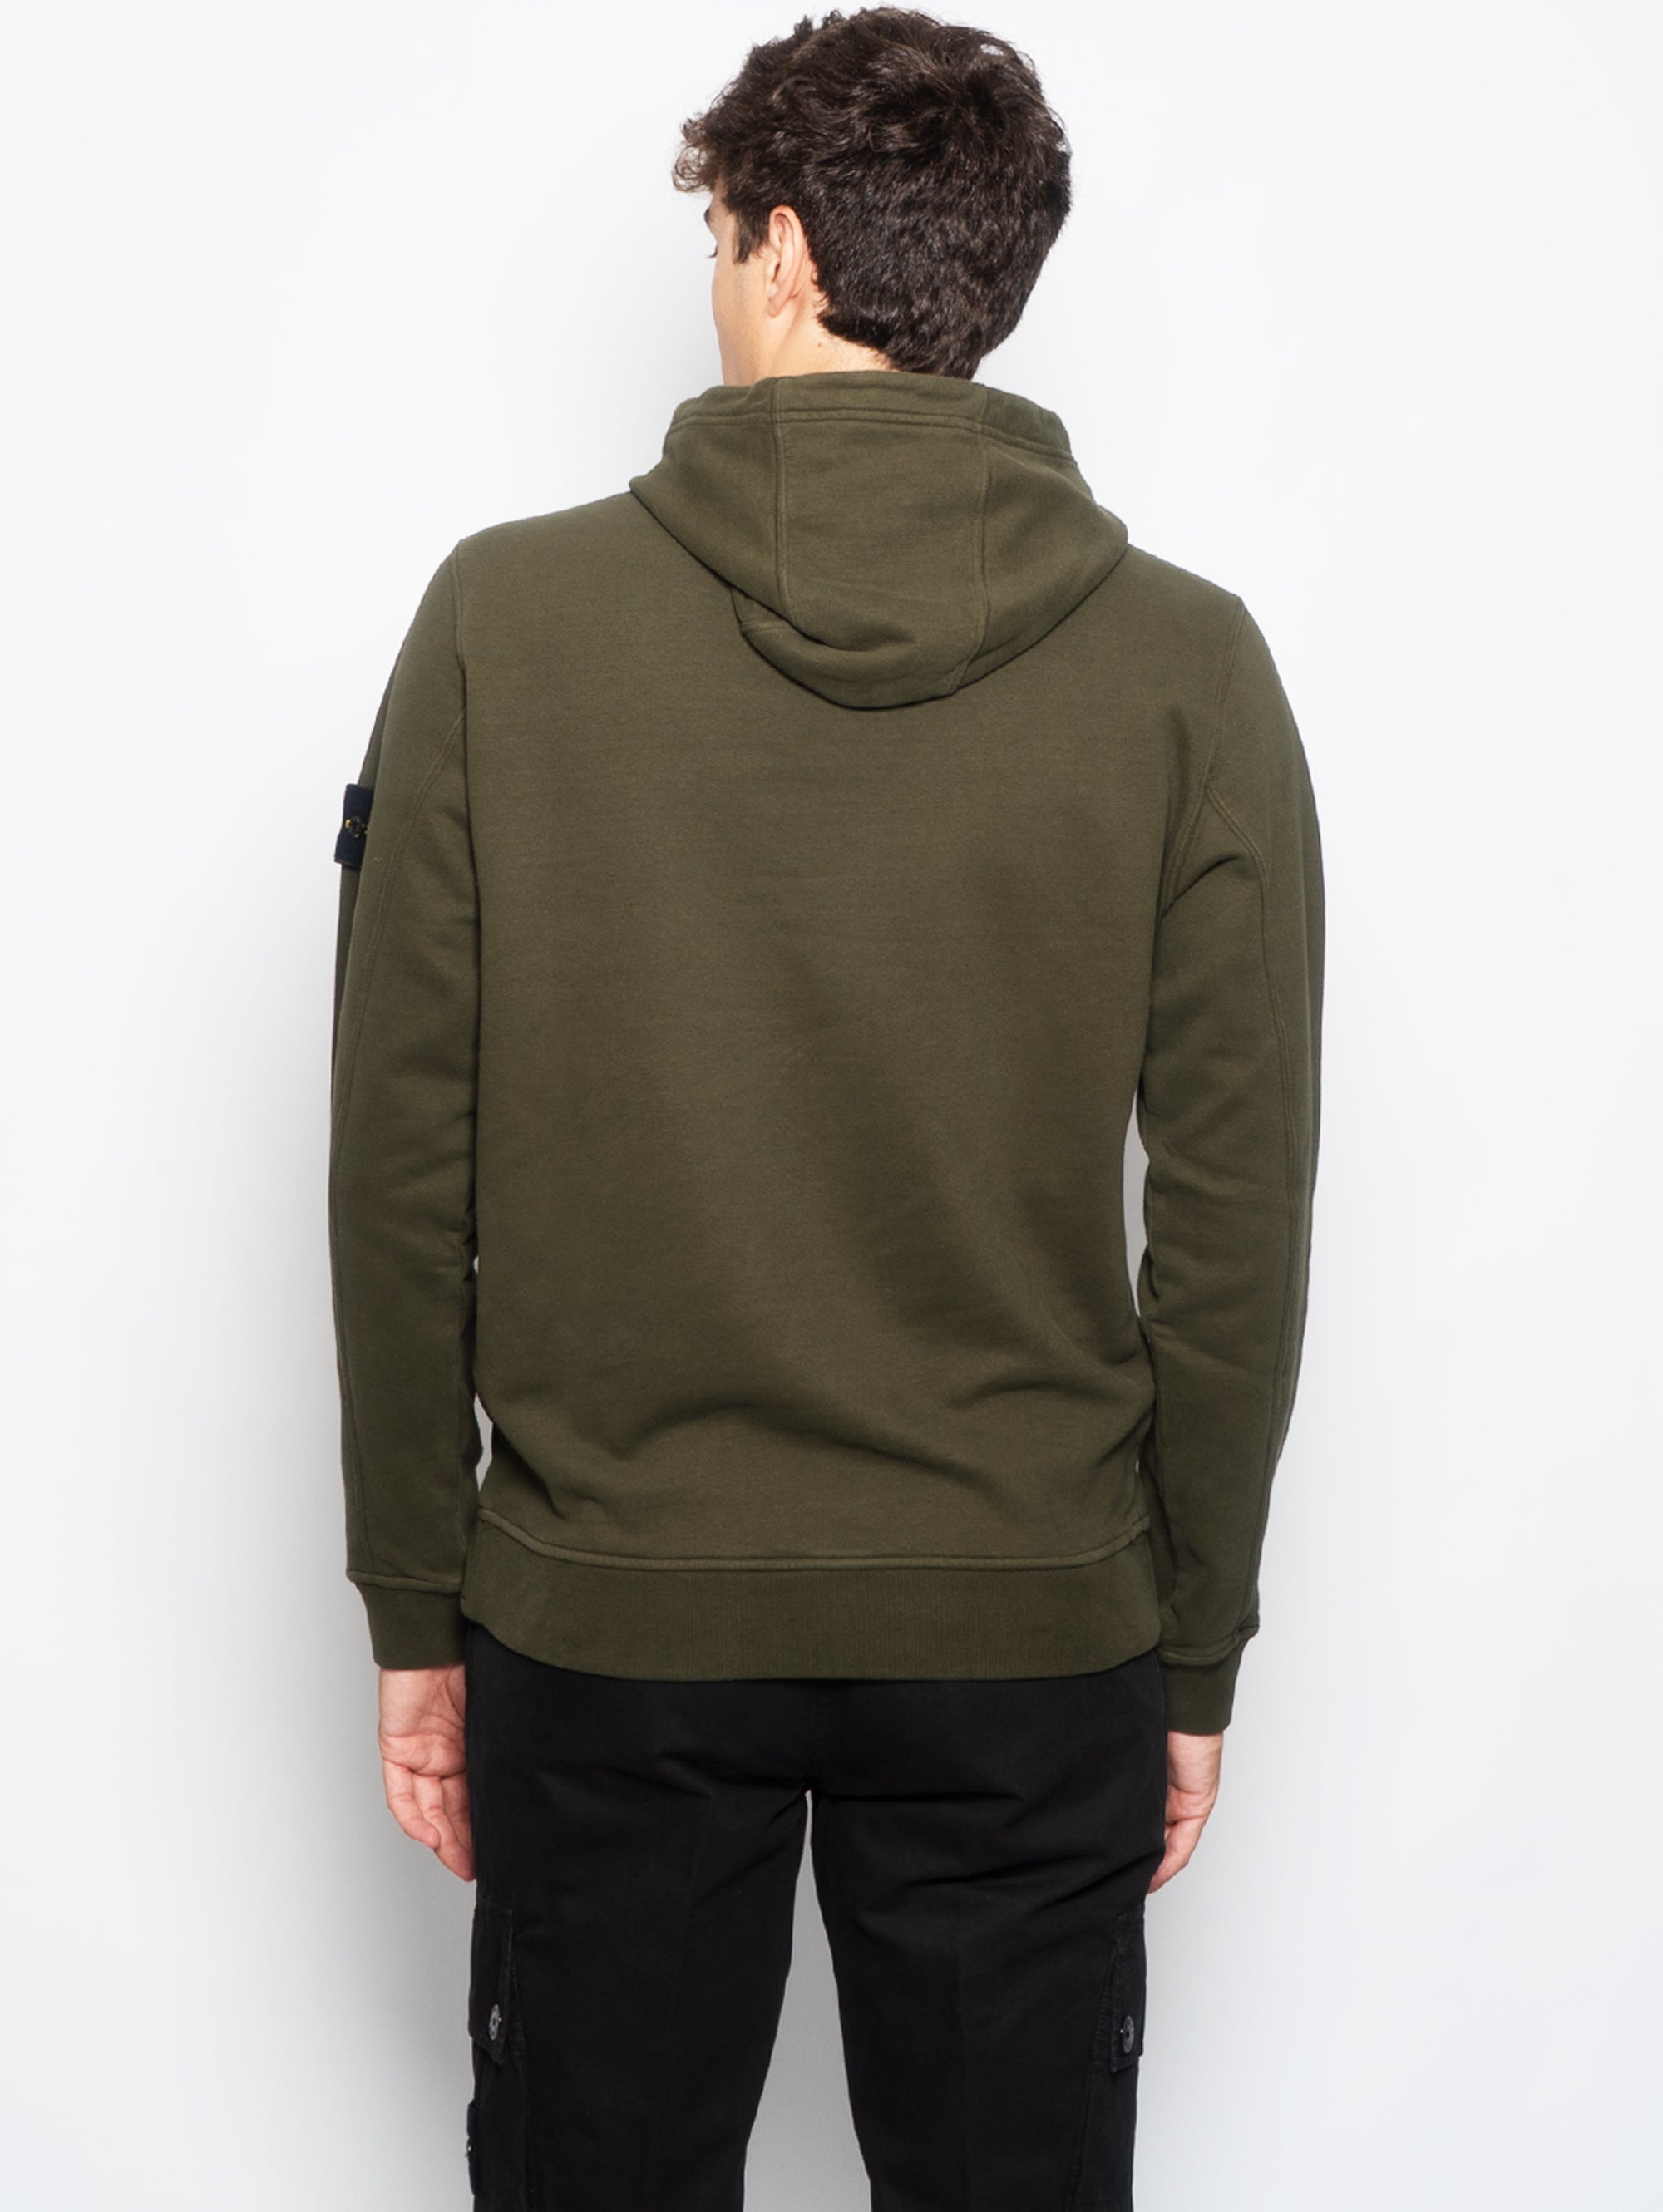 Olive Hooded Sweatshirt with Pouch Pocket